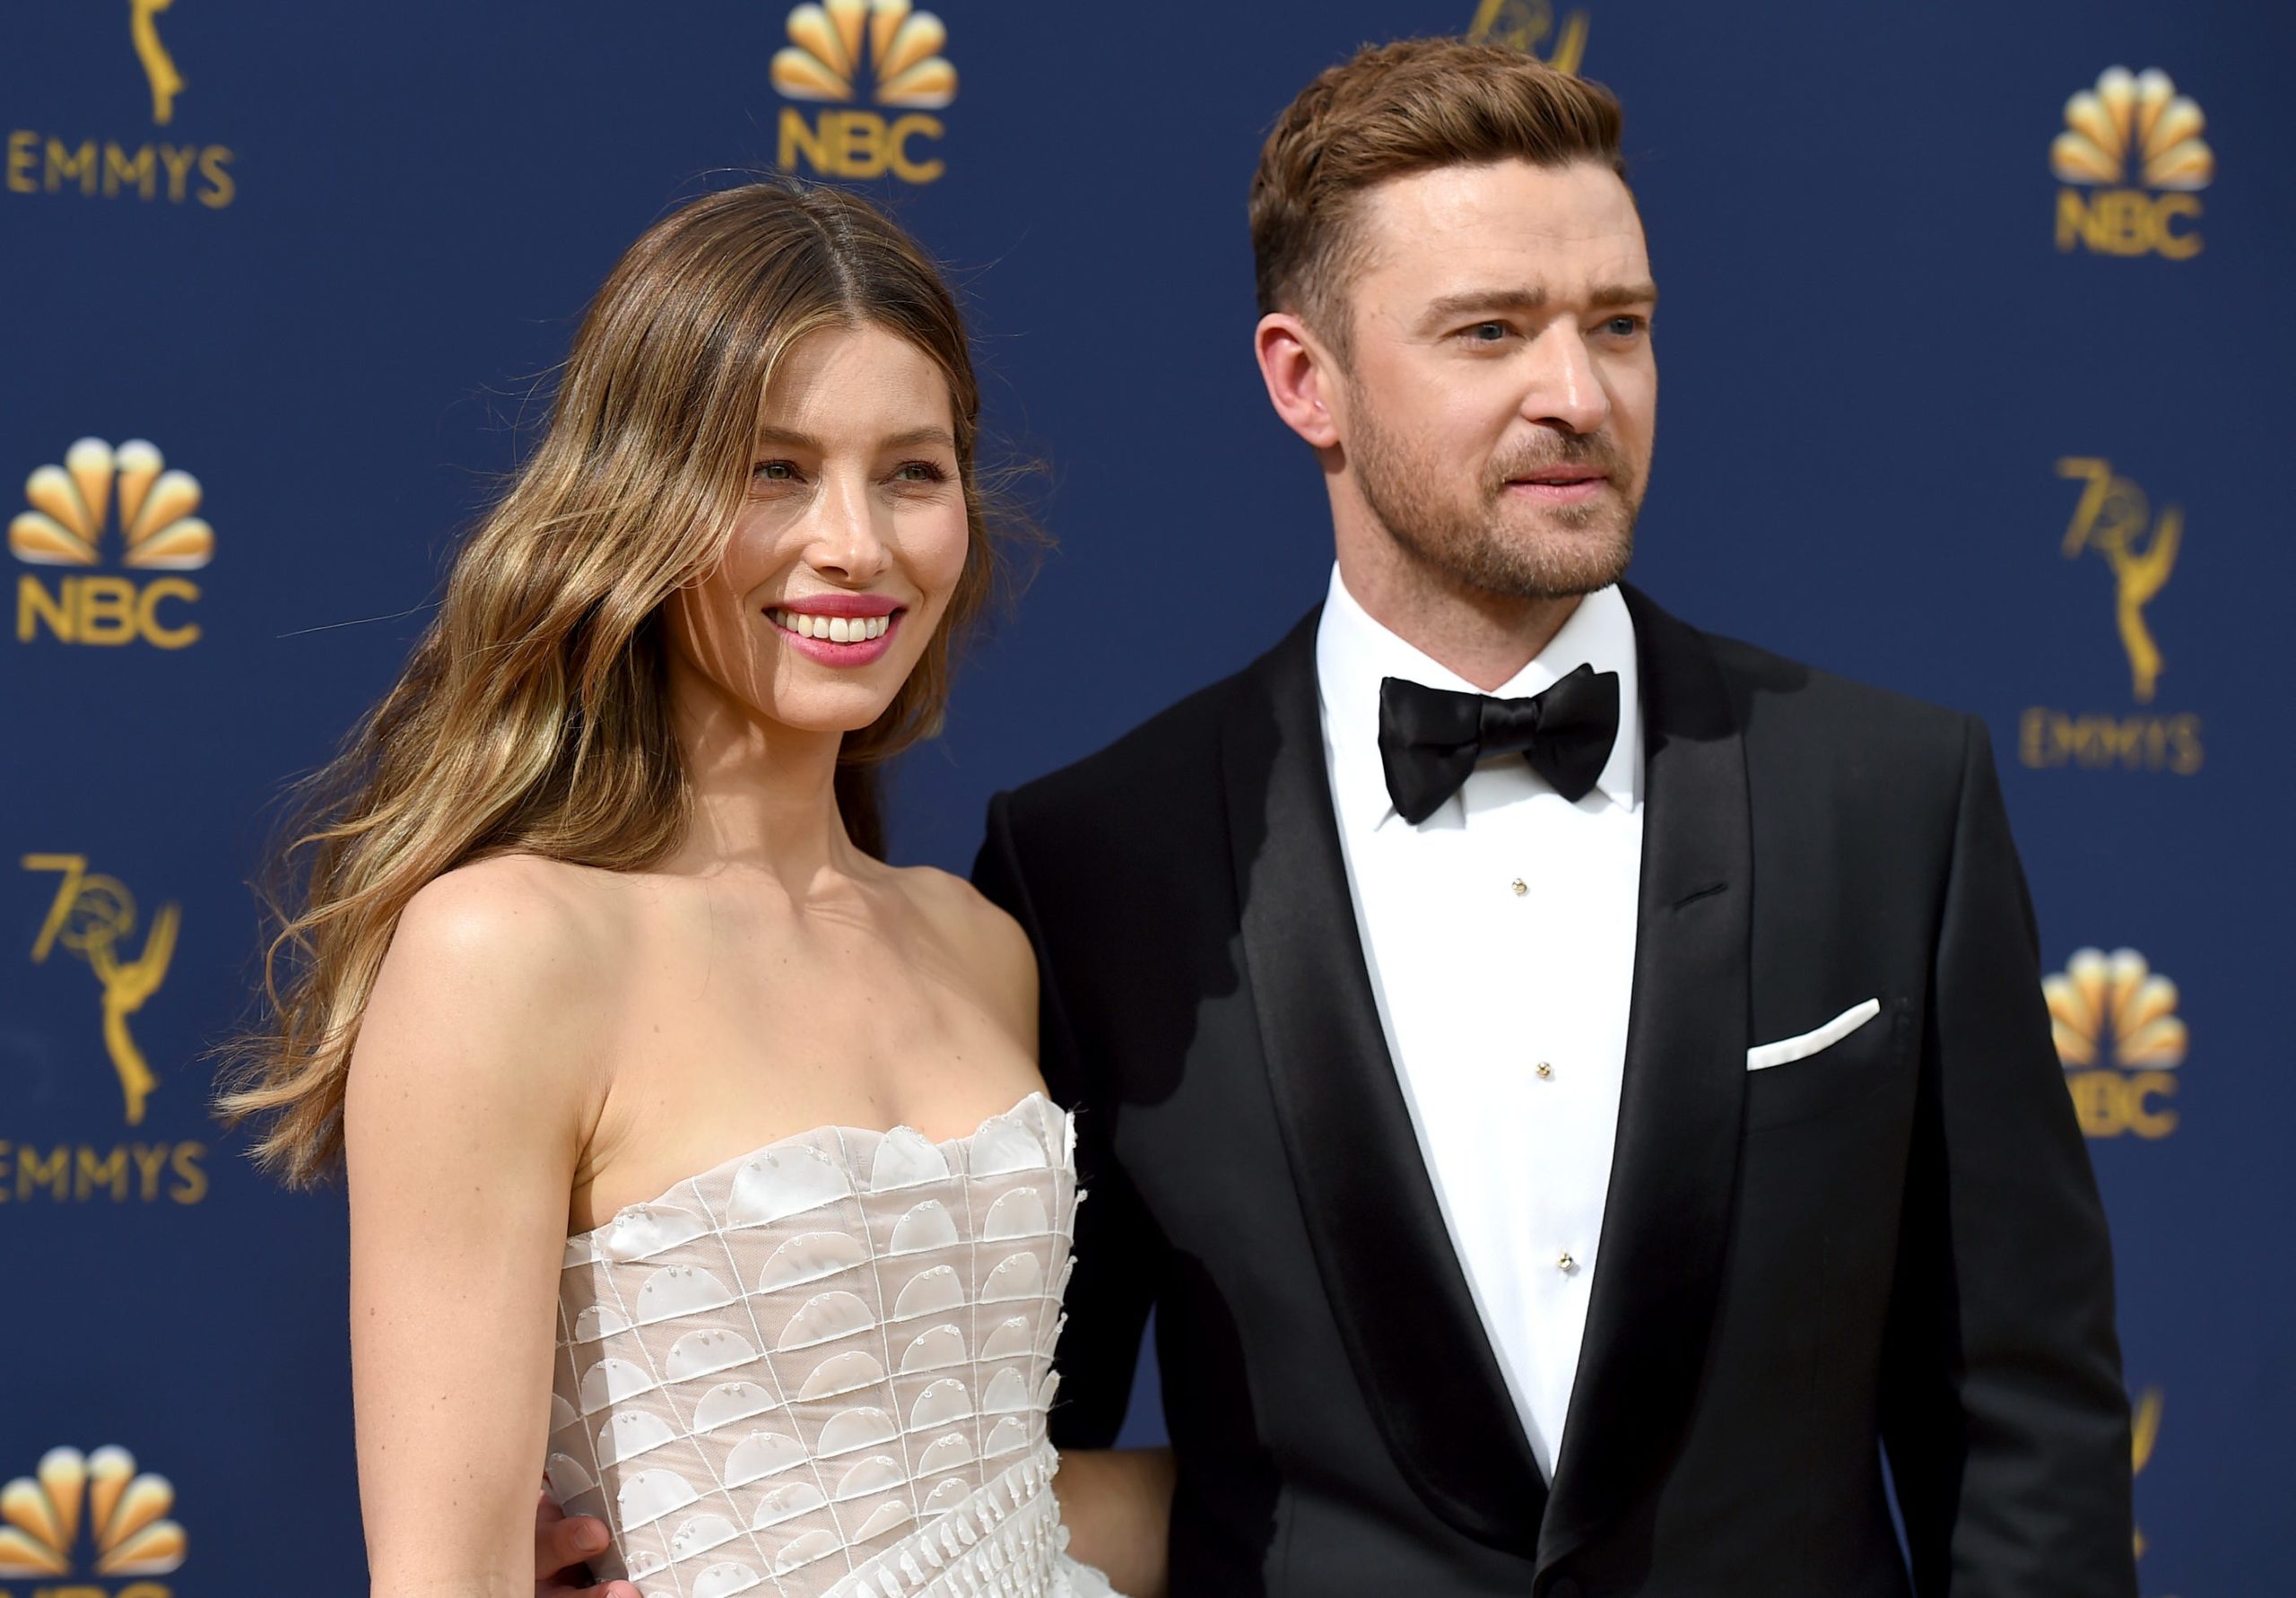 Justin Timberlake Banned By Girlfriend Jessica Biel from Working With Him After Making Cheating Allegations!